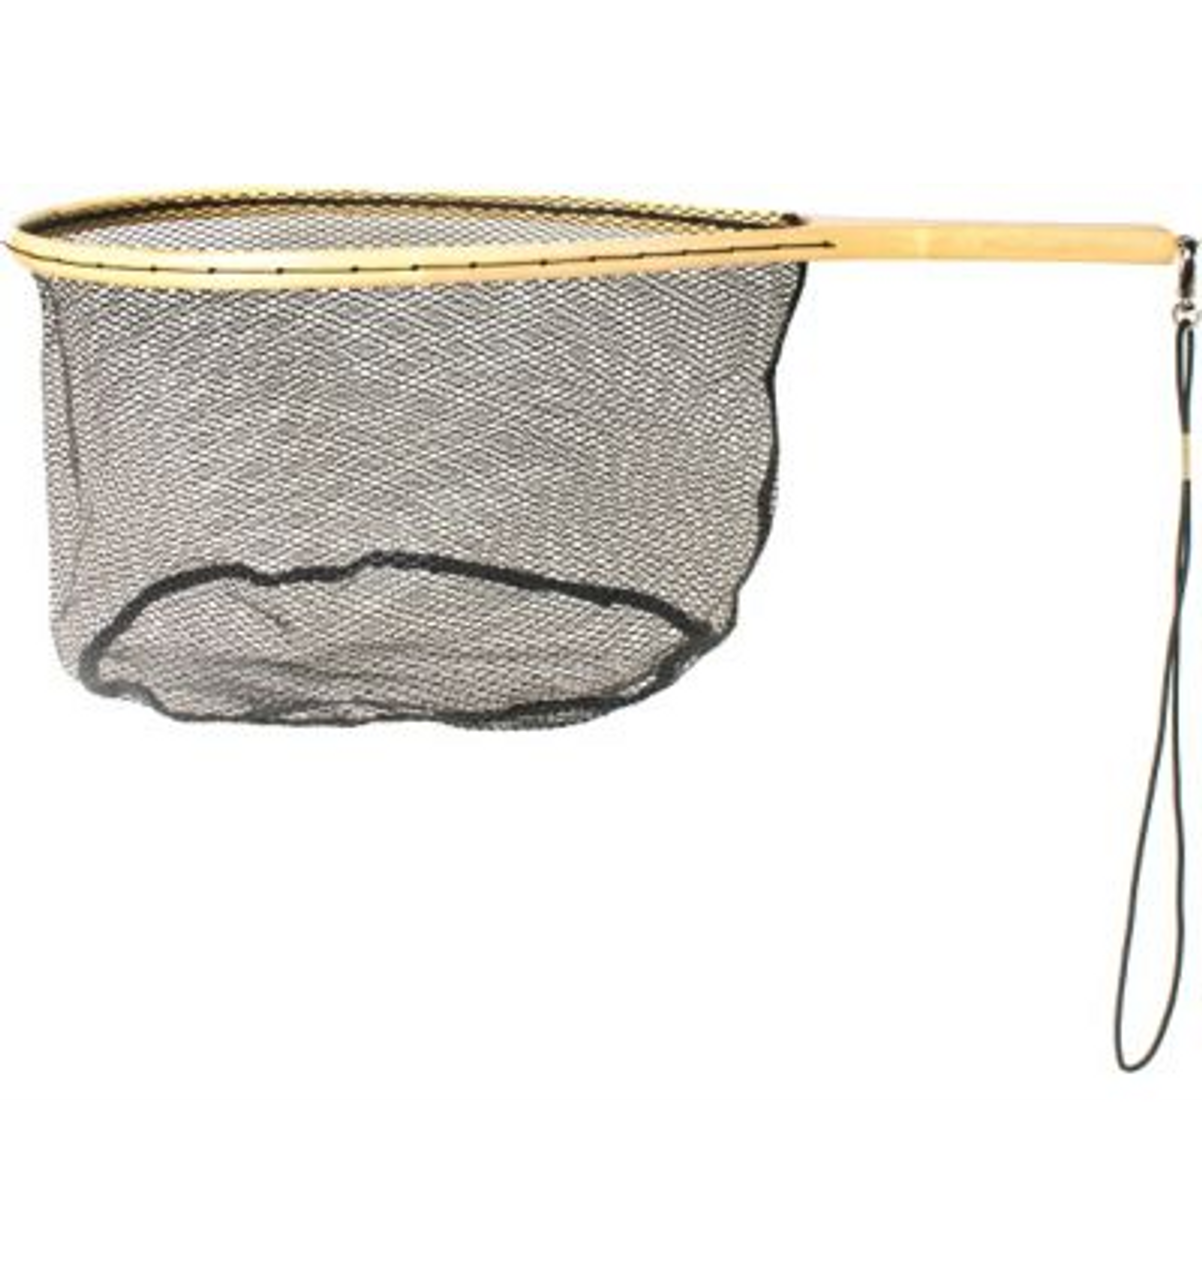 Eagle Claw Wooden Trout Net with Rubberized Netting